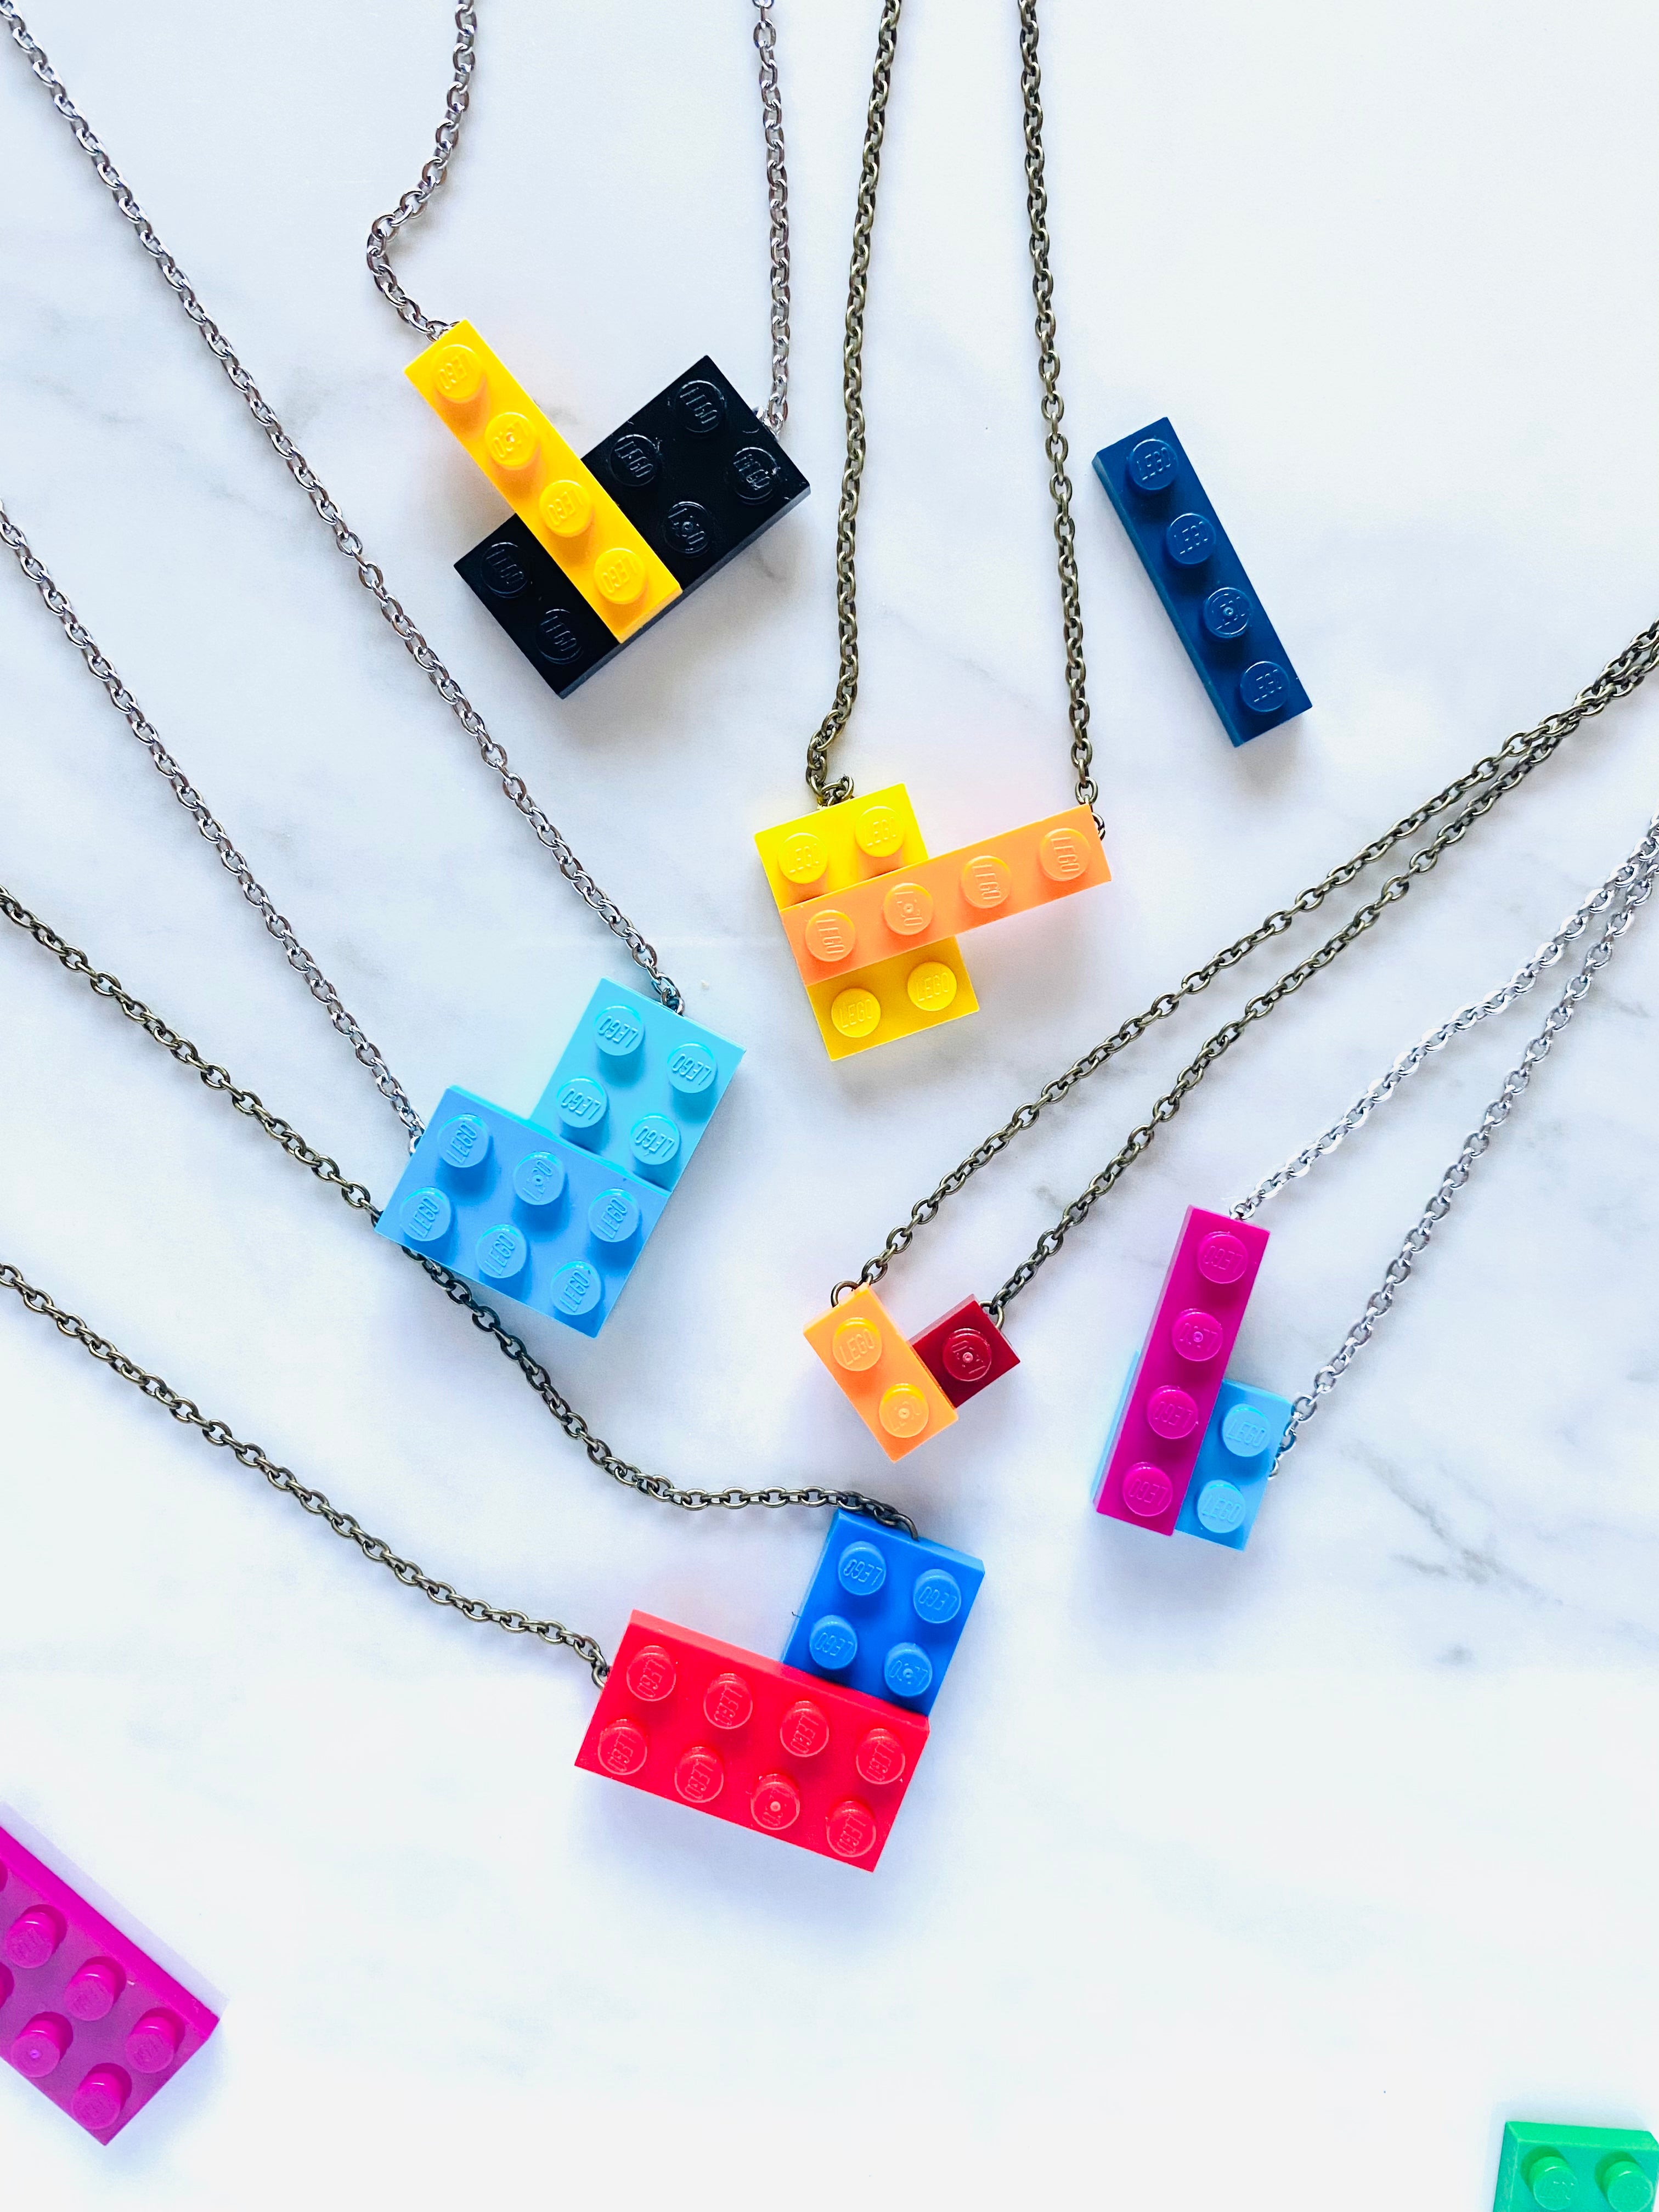 Several colors and shapes of Tu Snaps necklaces made from Lego pieces